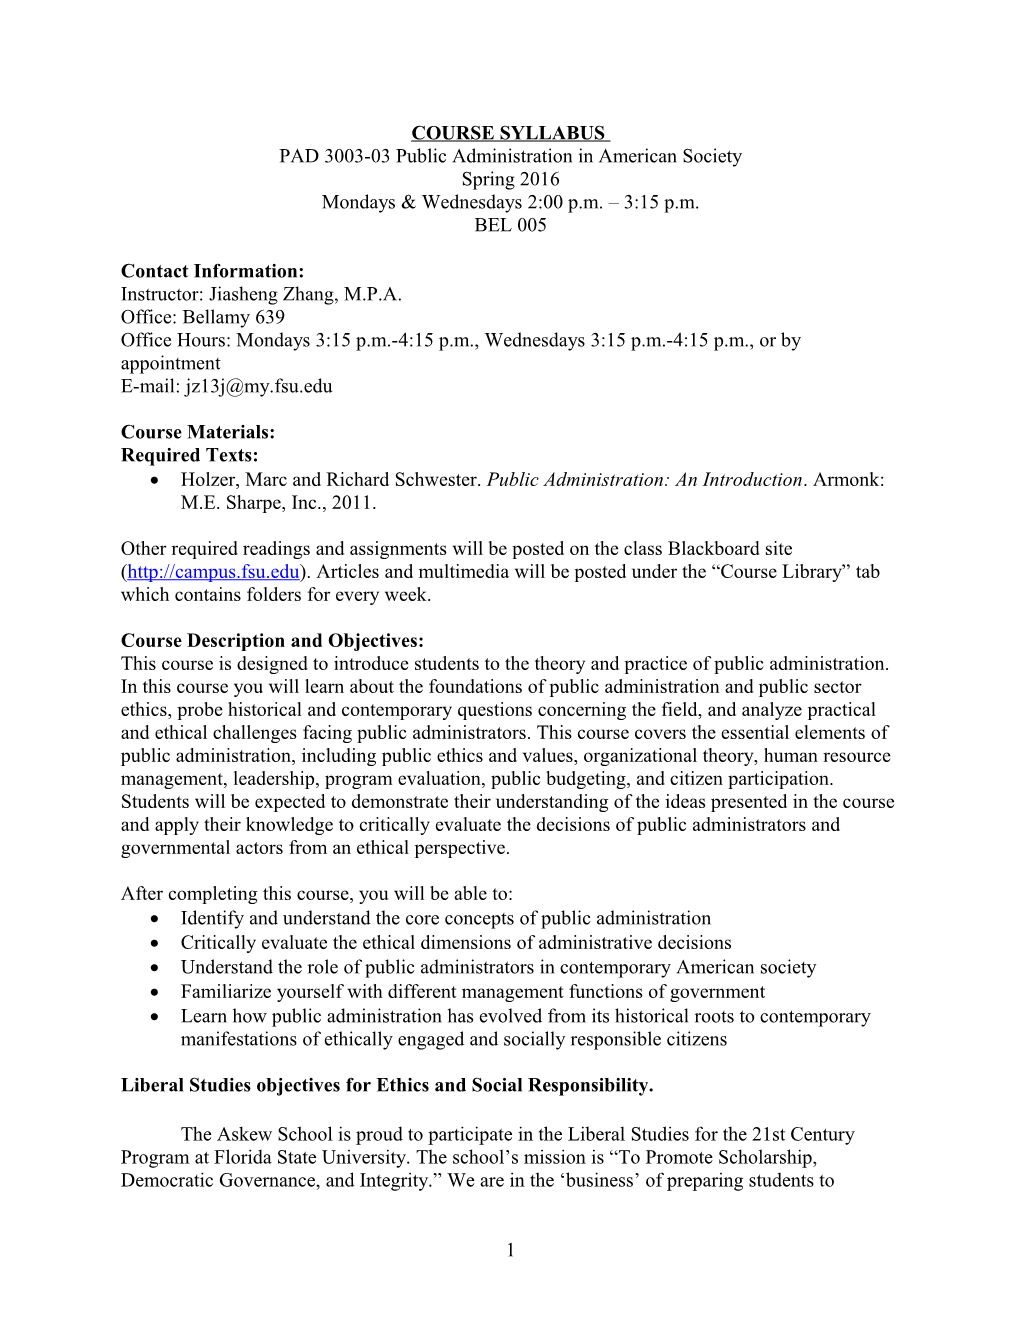 PAD 3003-03 Public Administration in American Society